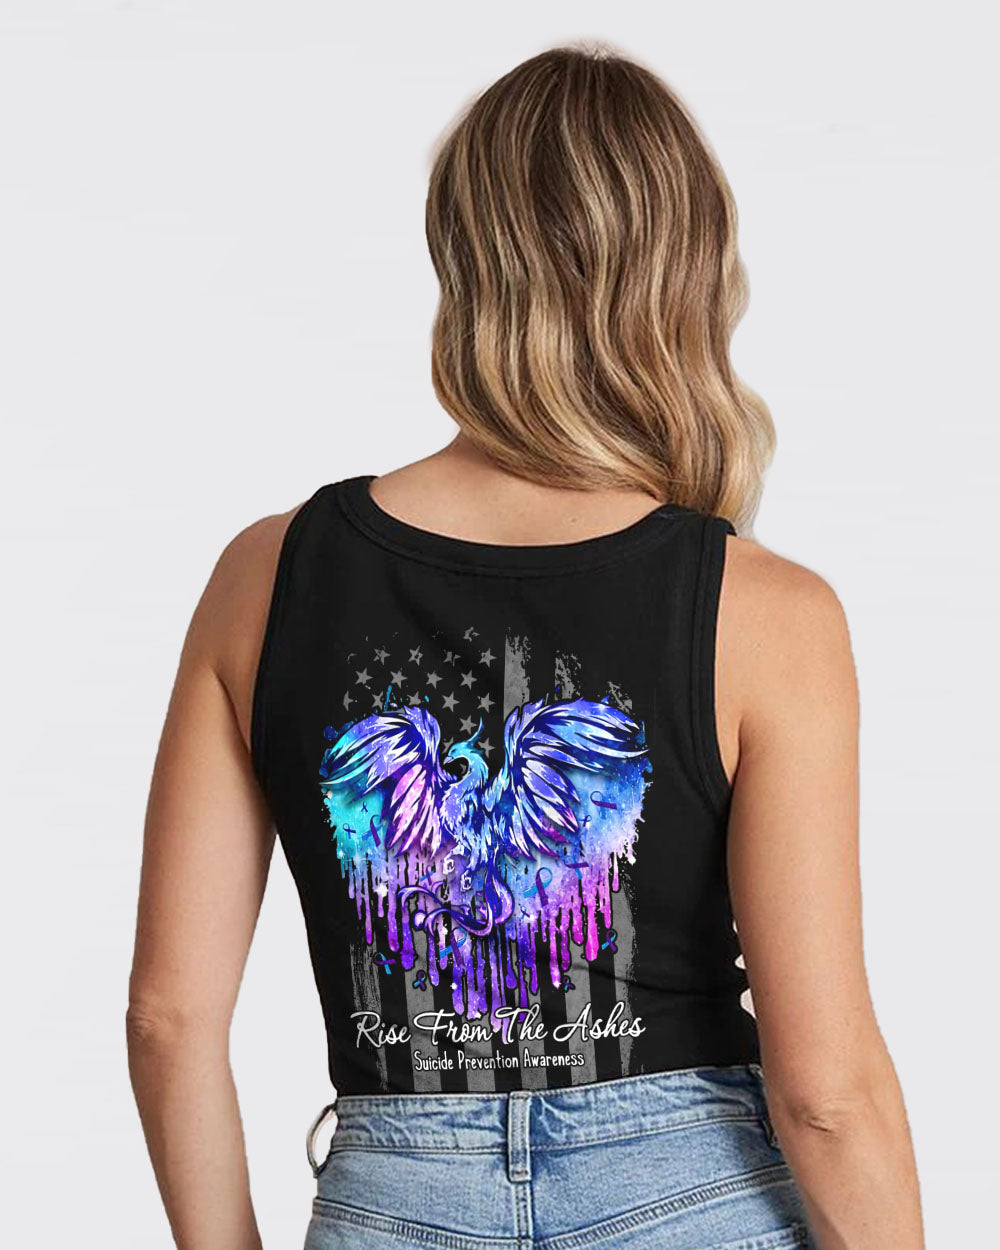 Rise From The Ashes Flag Women's Suicide Prevention Awareness Tanks